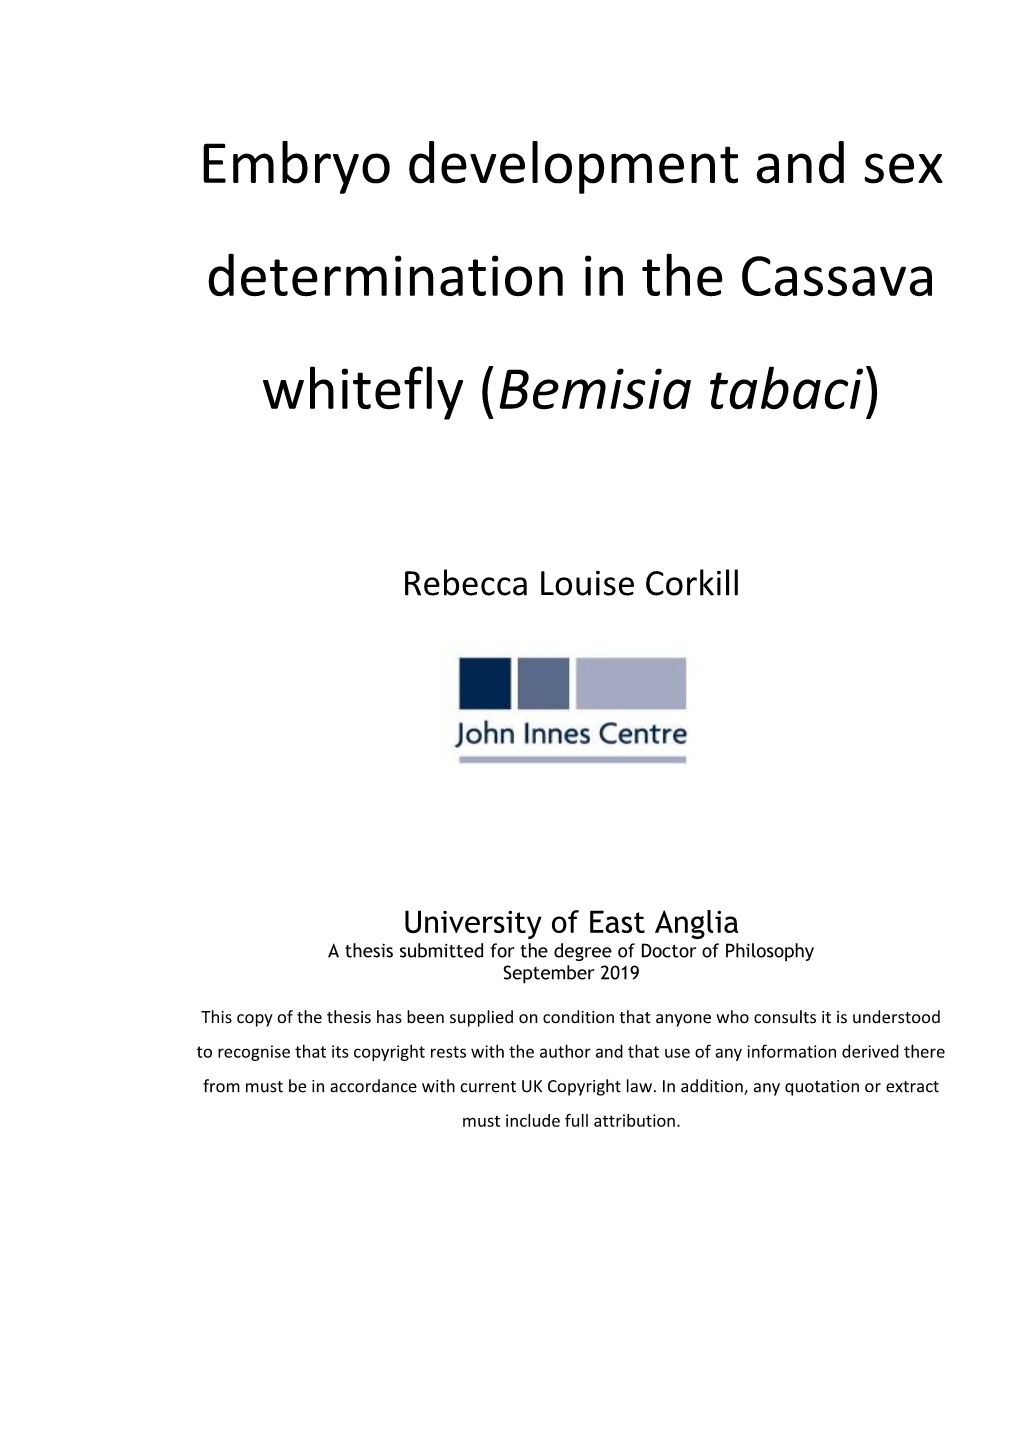 Embryo Development and Sex Determination in the Cassava Whitefly (Bemisia Tabaci)